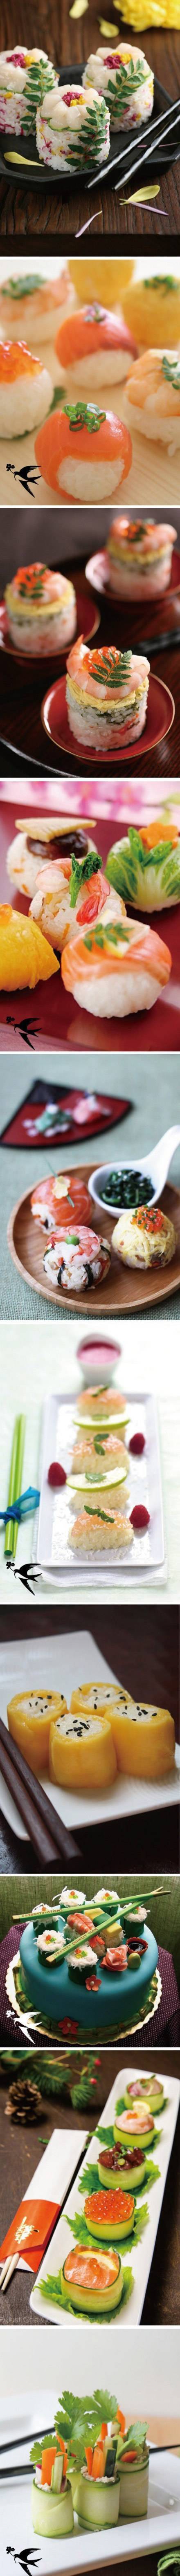 Rice and sushi pictures, cute and adorable in shape